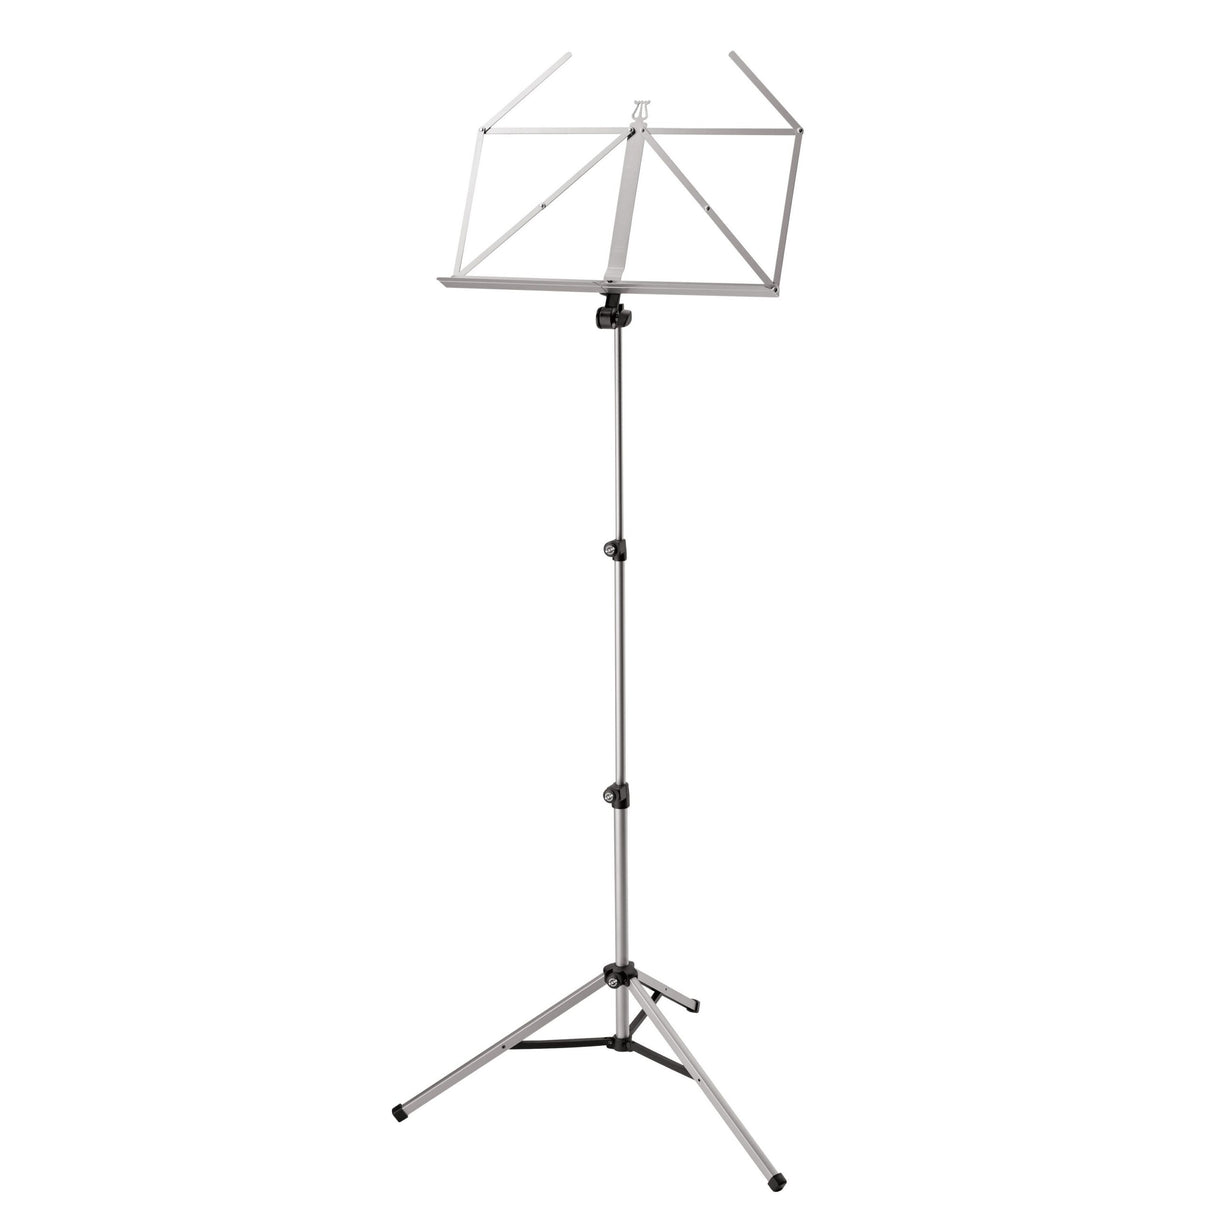 K&M 10065 Music Stand, Nickel Colored